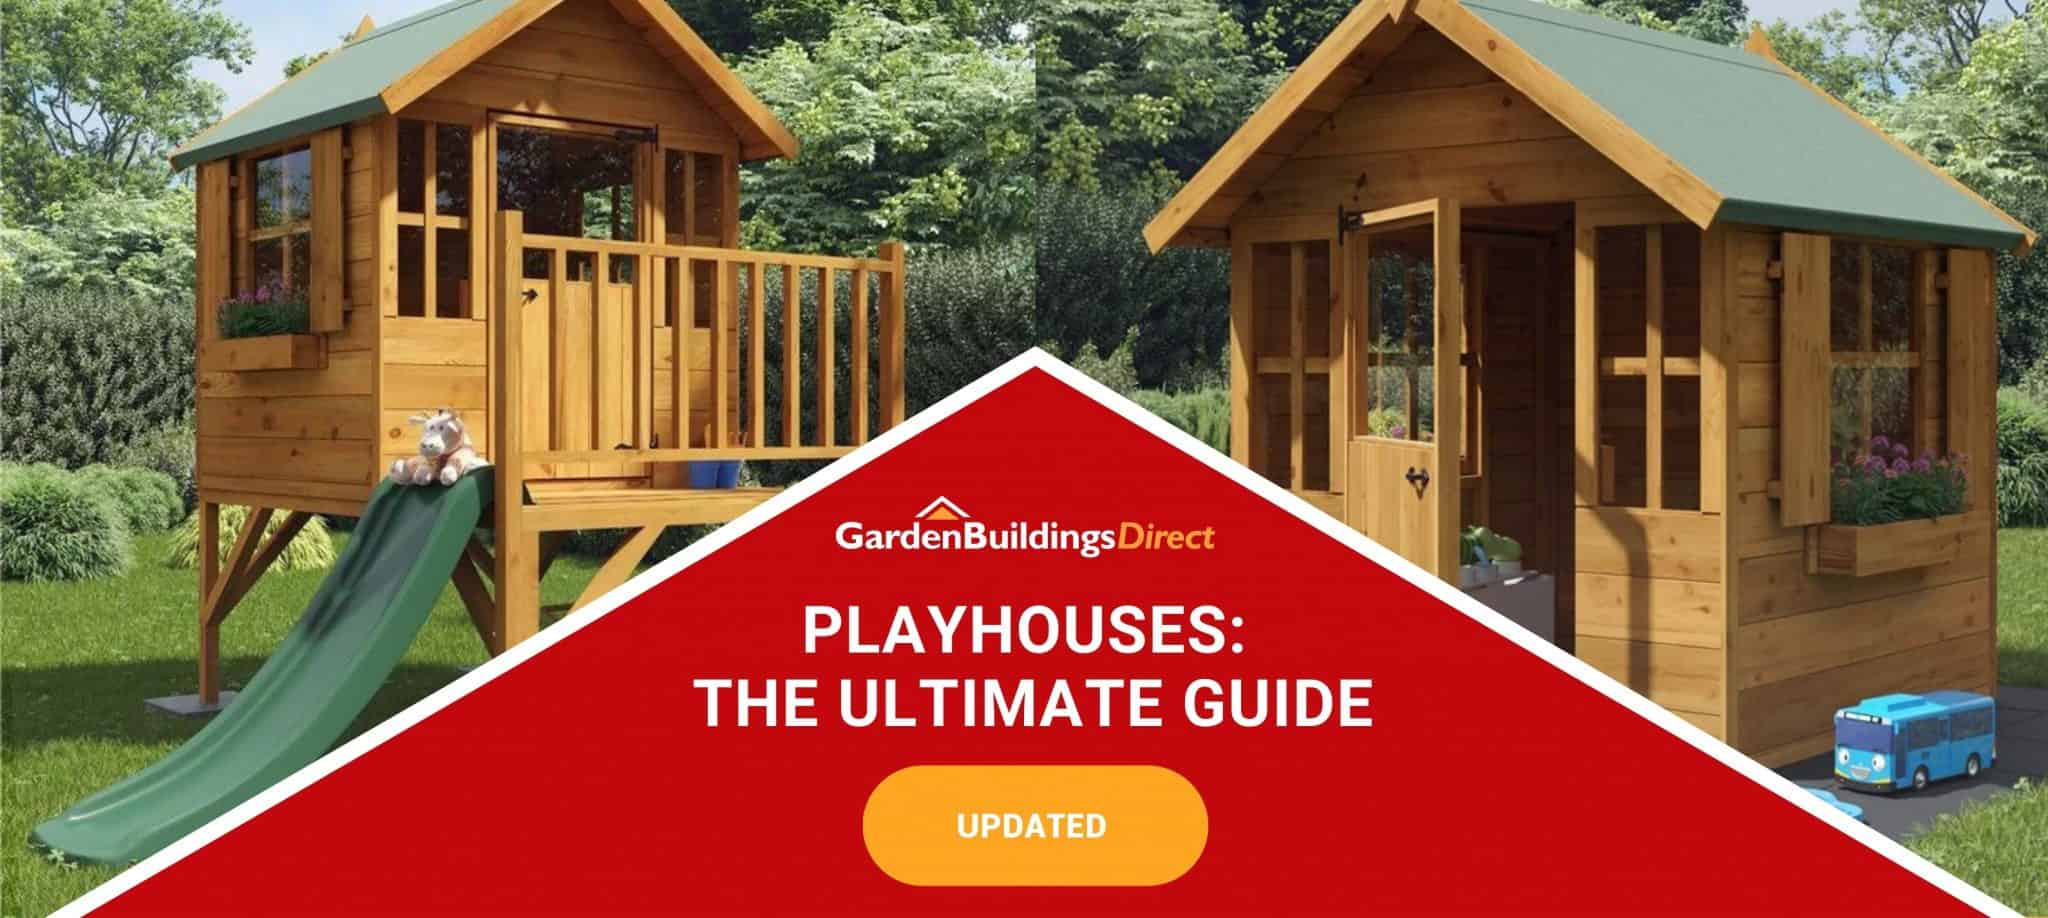 Playhouses: The Ultimate Guide on red arrow banner with Garden Buildings Direct Logo and two playhouses stood side-by-side